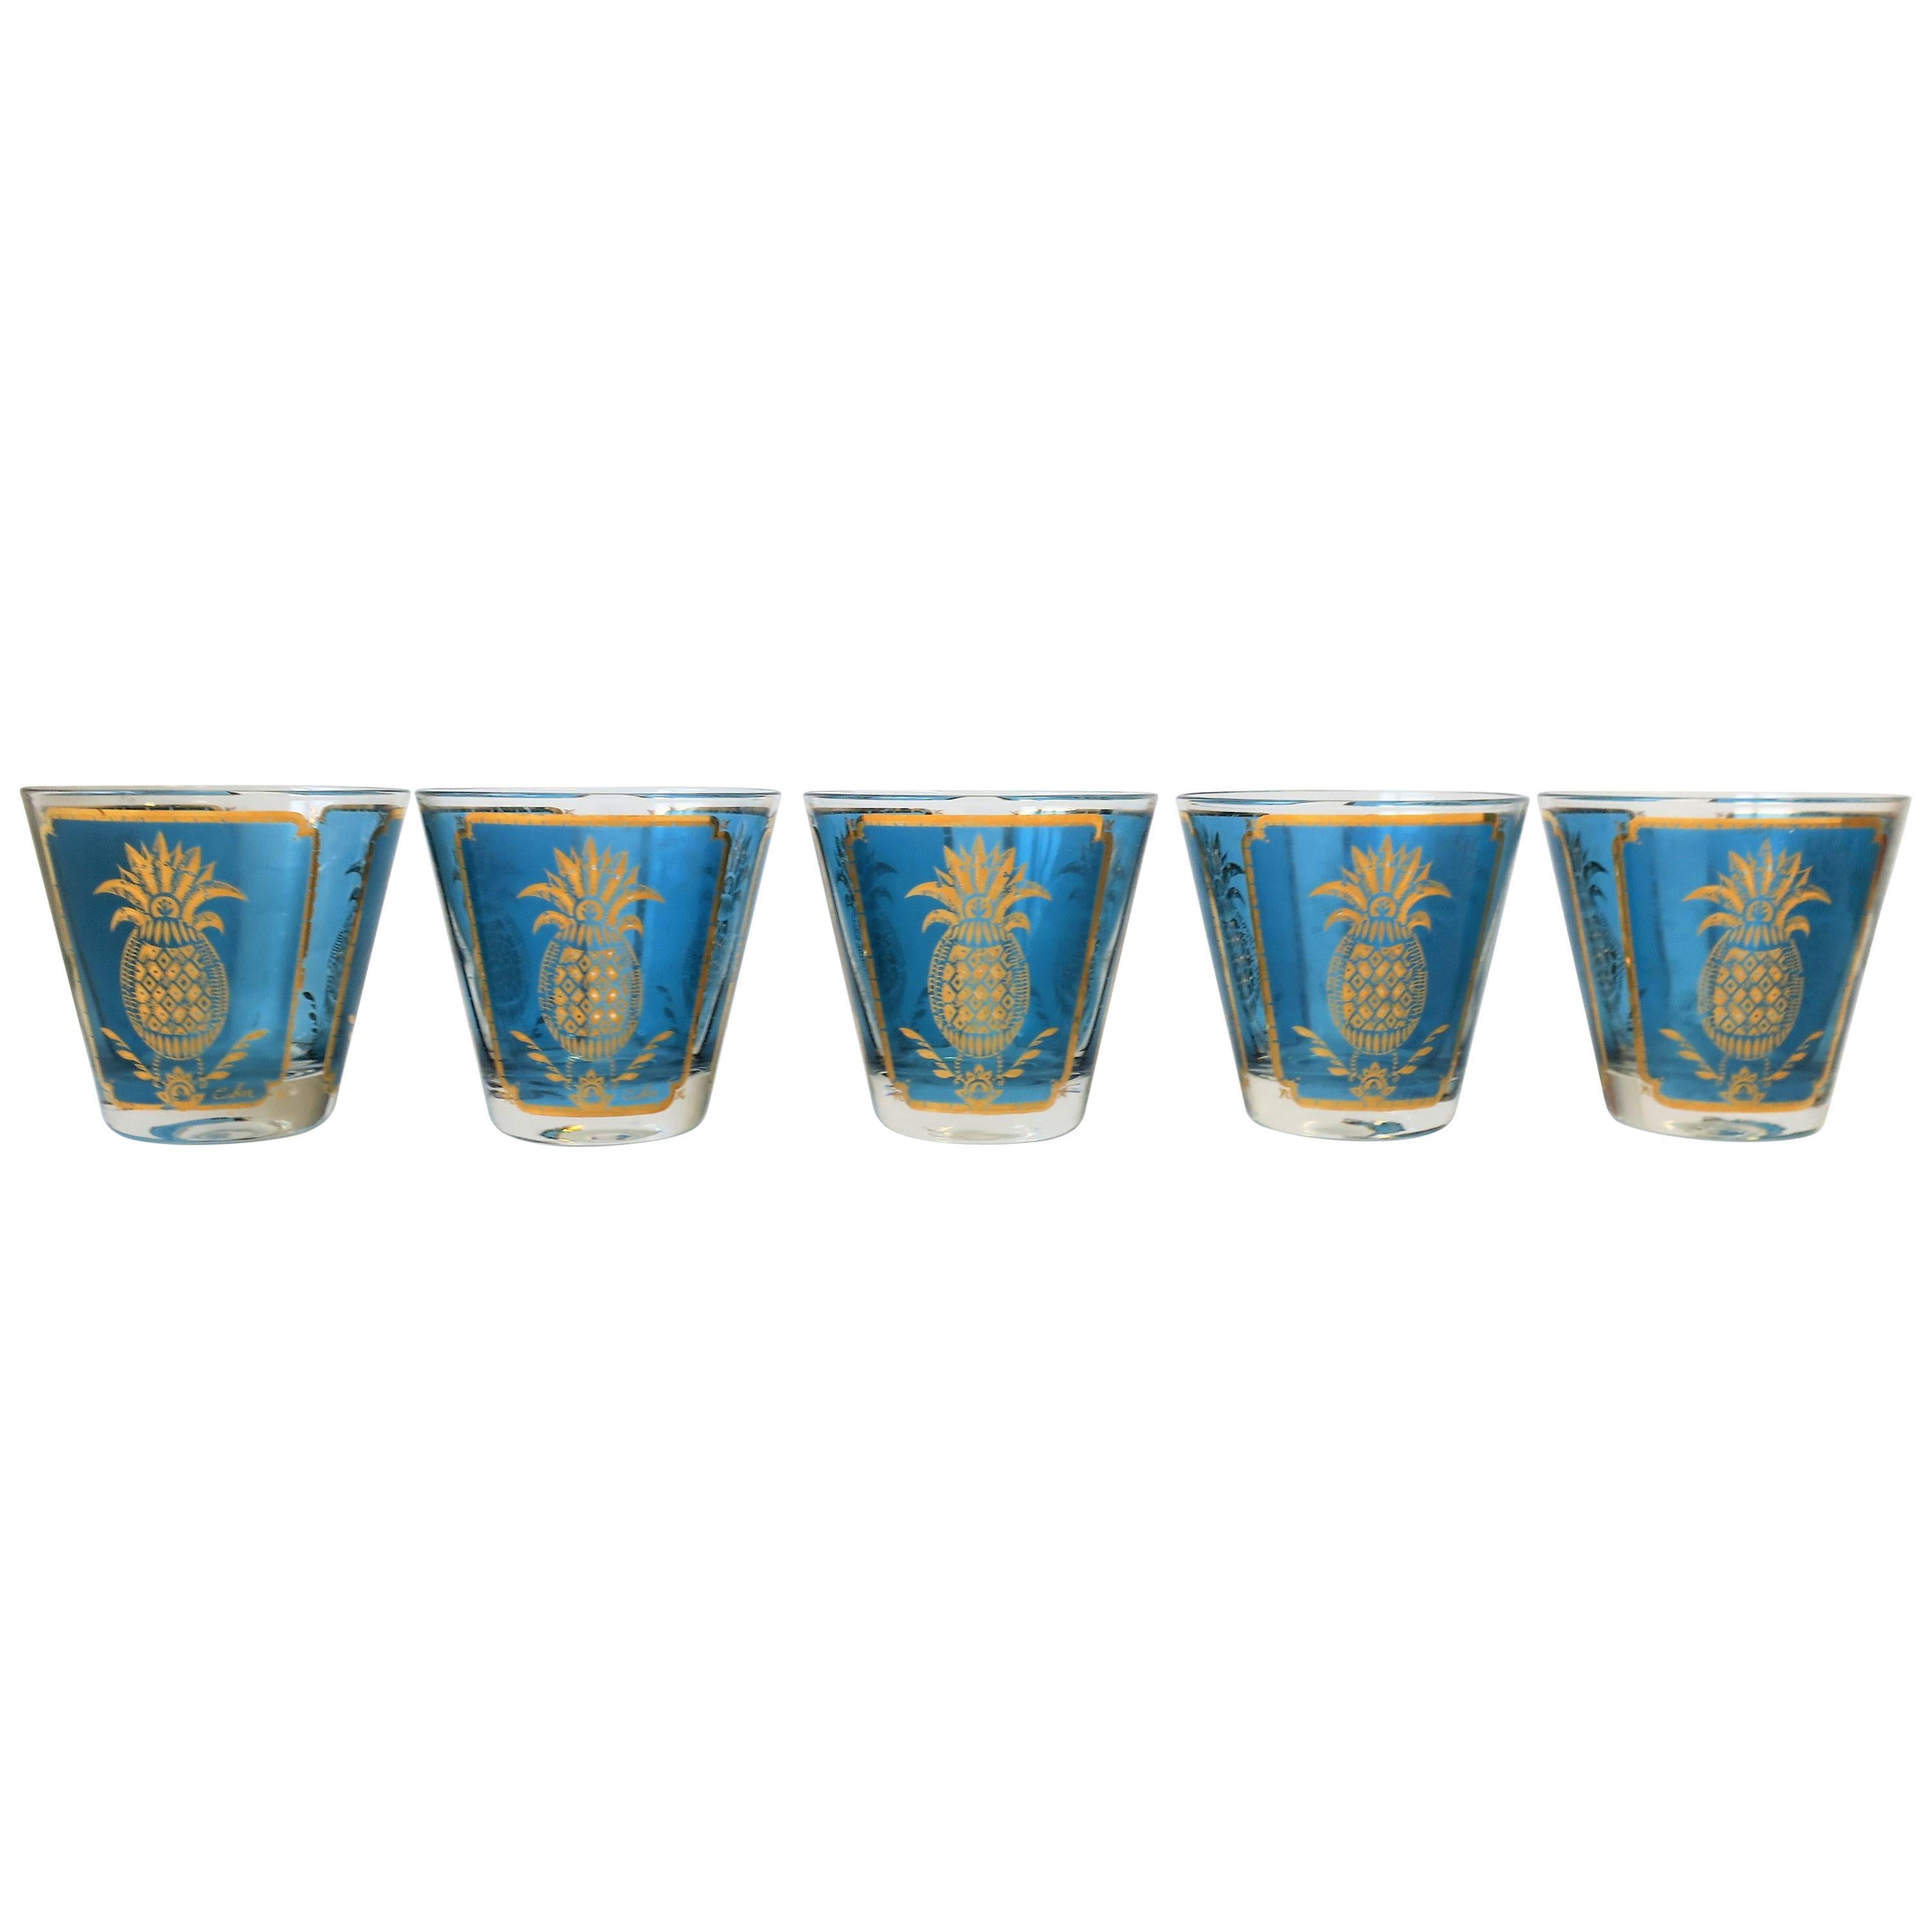 Midcentury Blue and Gold Rocks Cocktail Glasses with Pineapple Design